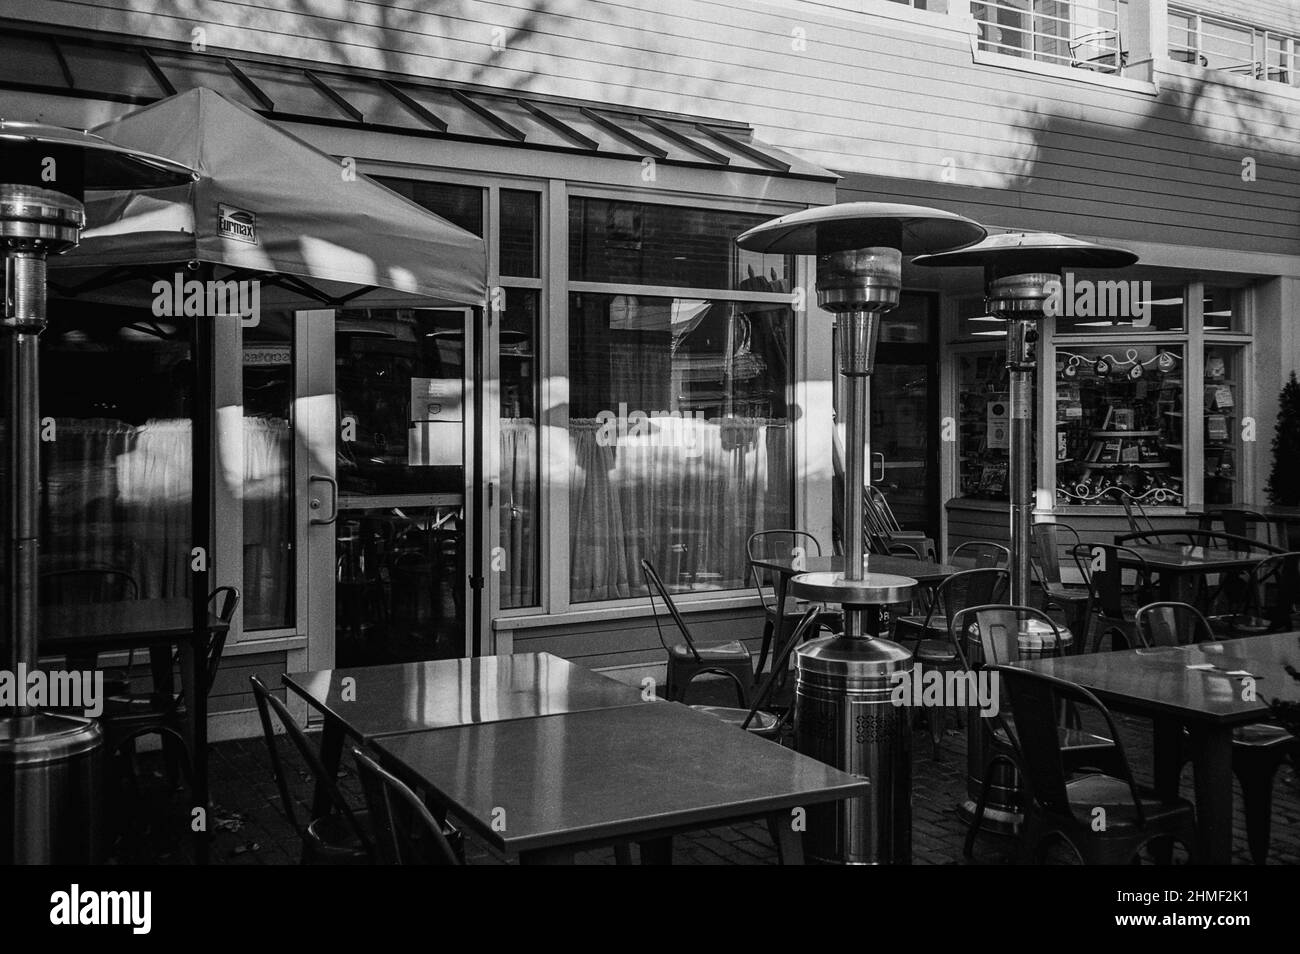 An outdoor seating area for restaurant sits empty during off season on autumn day. Lexington, Massachusetts Stock Photo